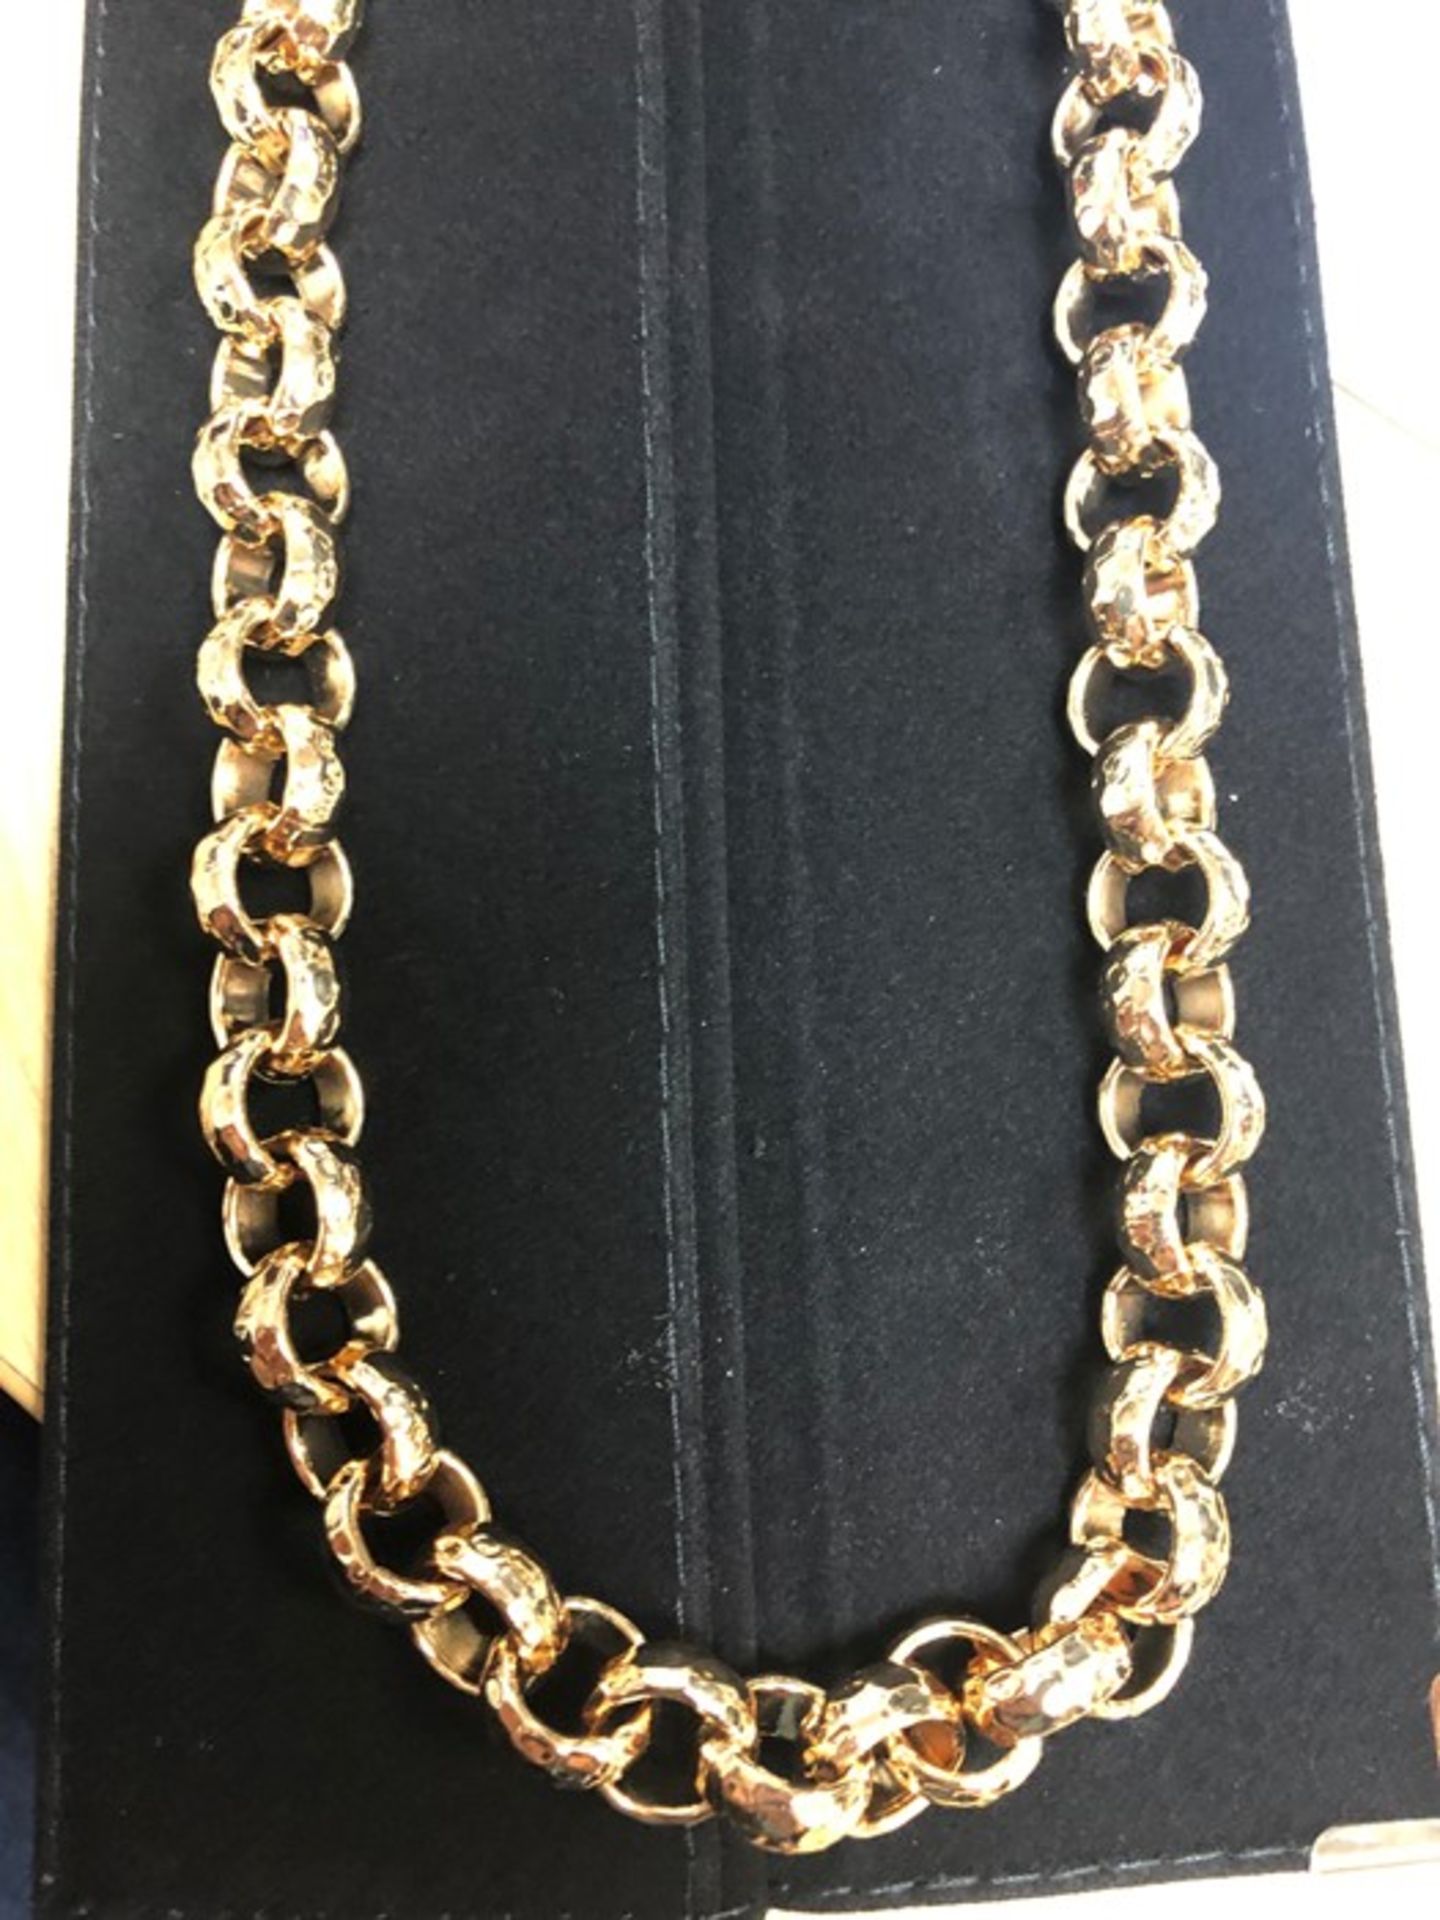 Gold Filled Diamond cut Belcher Chain Necklace and Bracelet set, new, Necklace is 24" and weighs 160 - Image 3 of 4